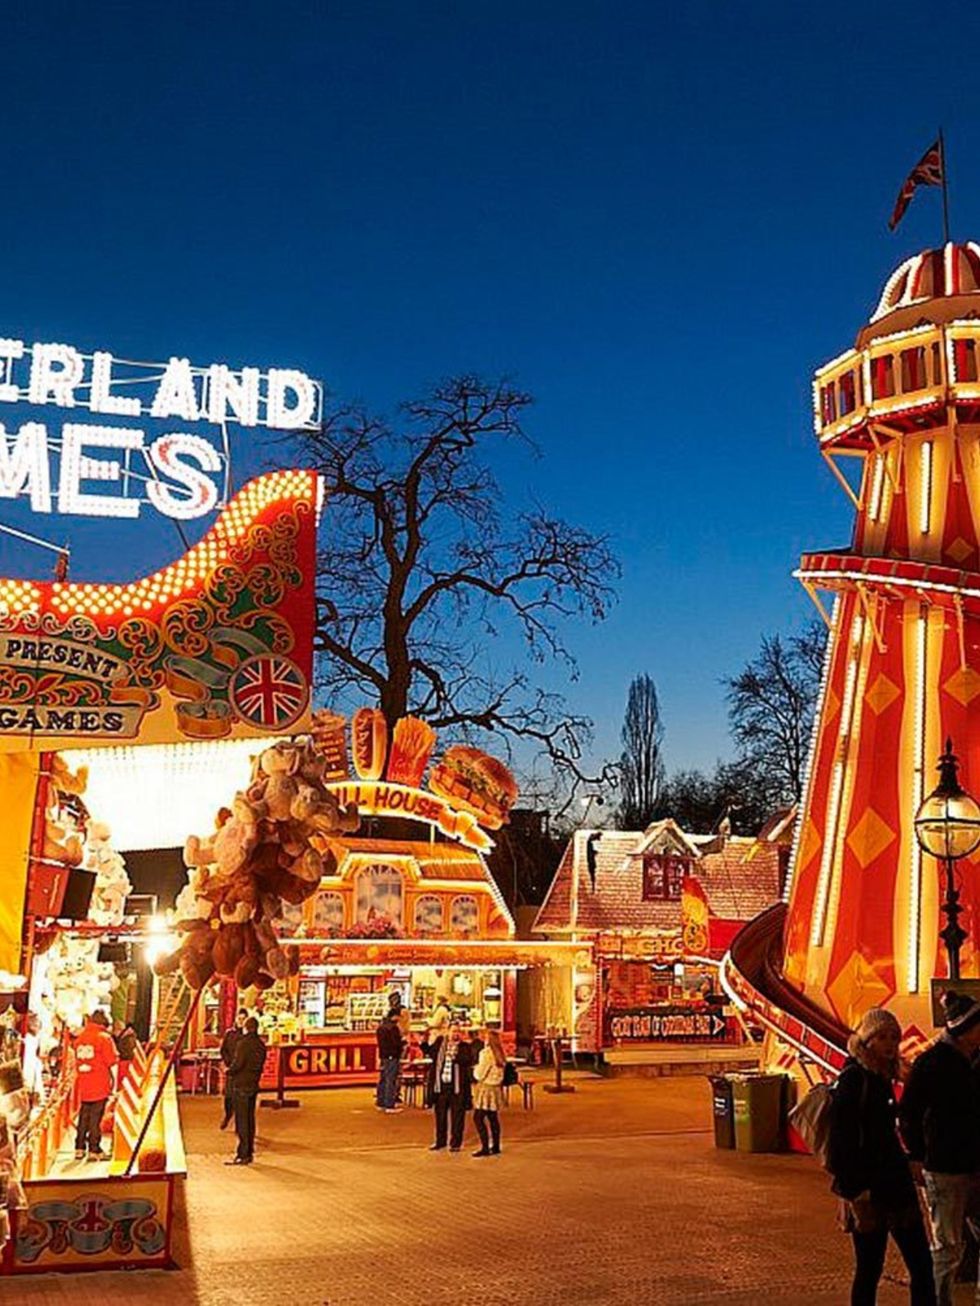 <p><strong>GOING OUT: Hyde Park Winter Wonderland</strong></p>

<p>Ice skating, grottos and glühwein by the tankard  is it any wonder that Winter Wonderland is fast becoming our favourite Christmas tradition?</p>

<p>The Hyde Park takeover returns this y